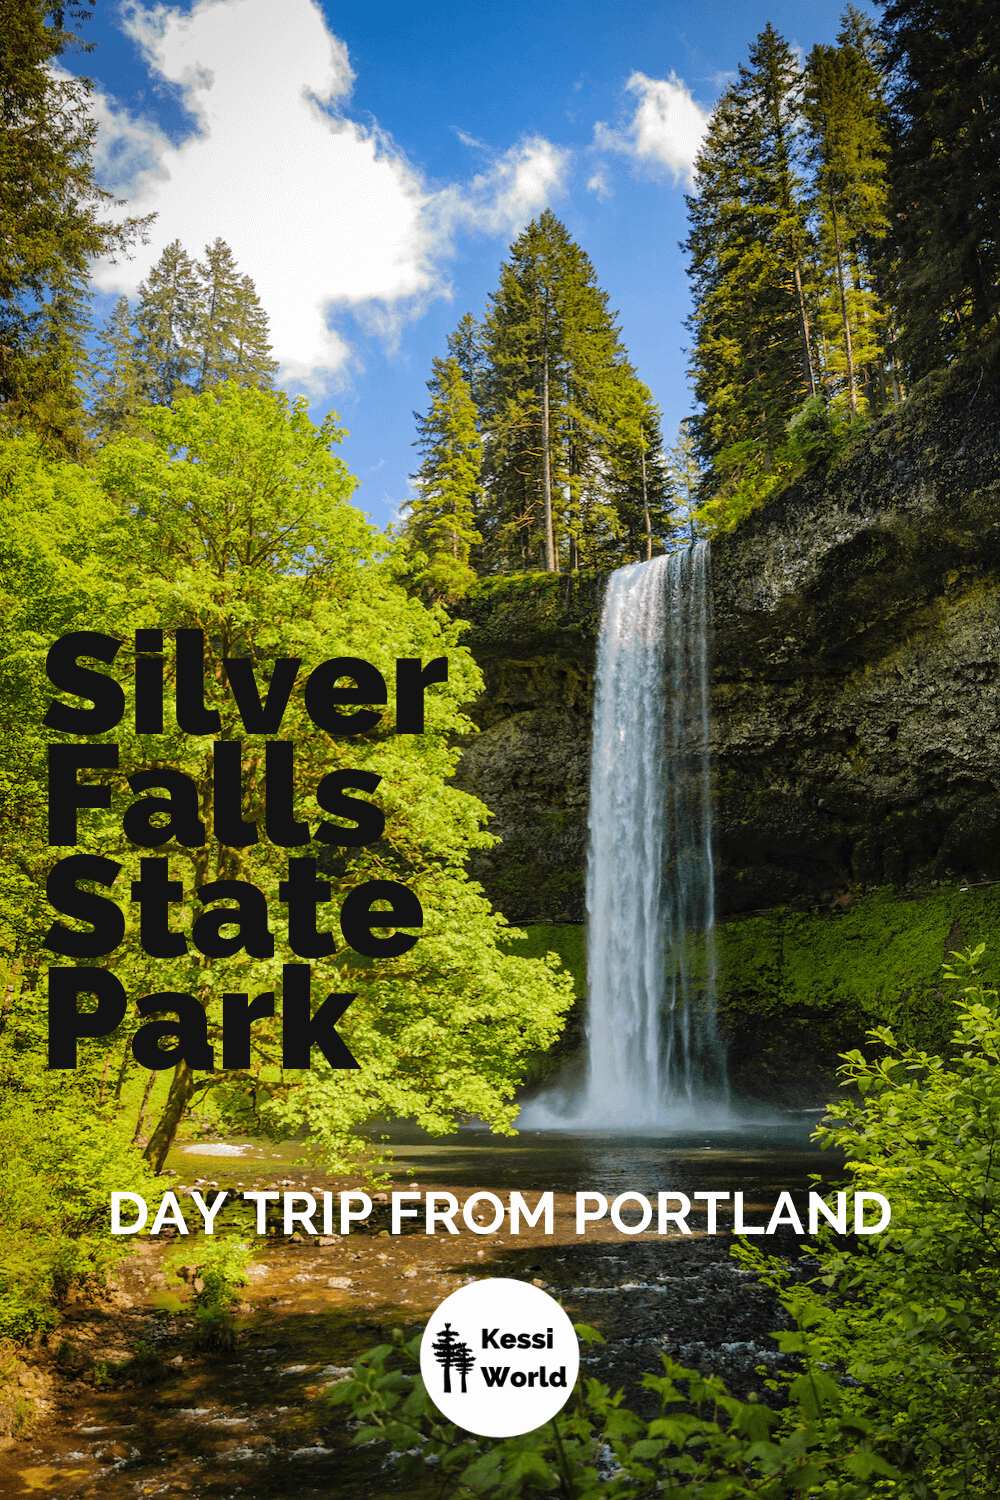 This Pinterest tile shows a great day trip from Portland. Silver Creek State Park is one of Oregon's picturesque. This is one of the main waterfalls cascading over a cliff of rock. The water splashes up on the creek below, creating waves and milky mist. The maple trees framing the waterfall are newly bloomed green leaves.